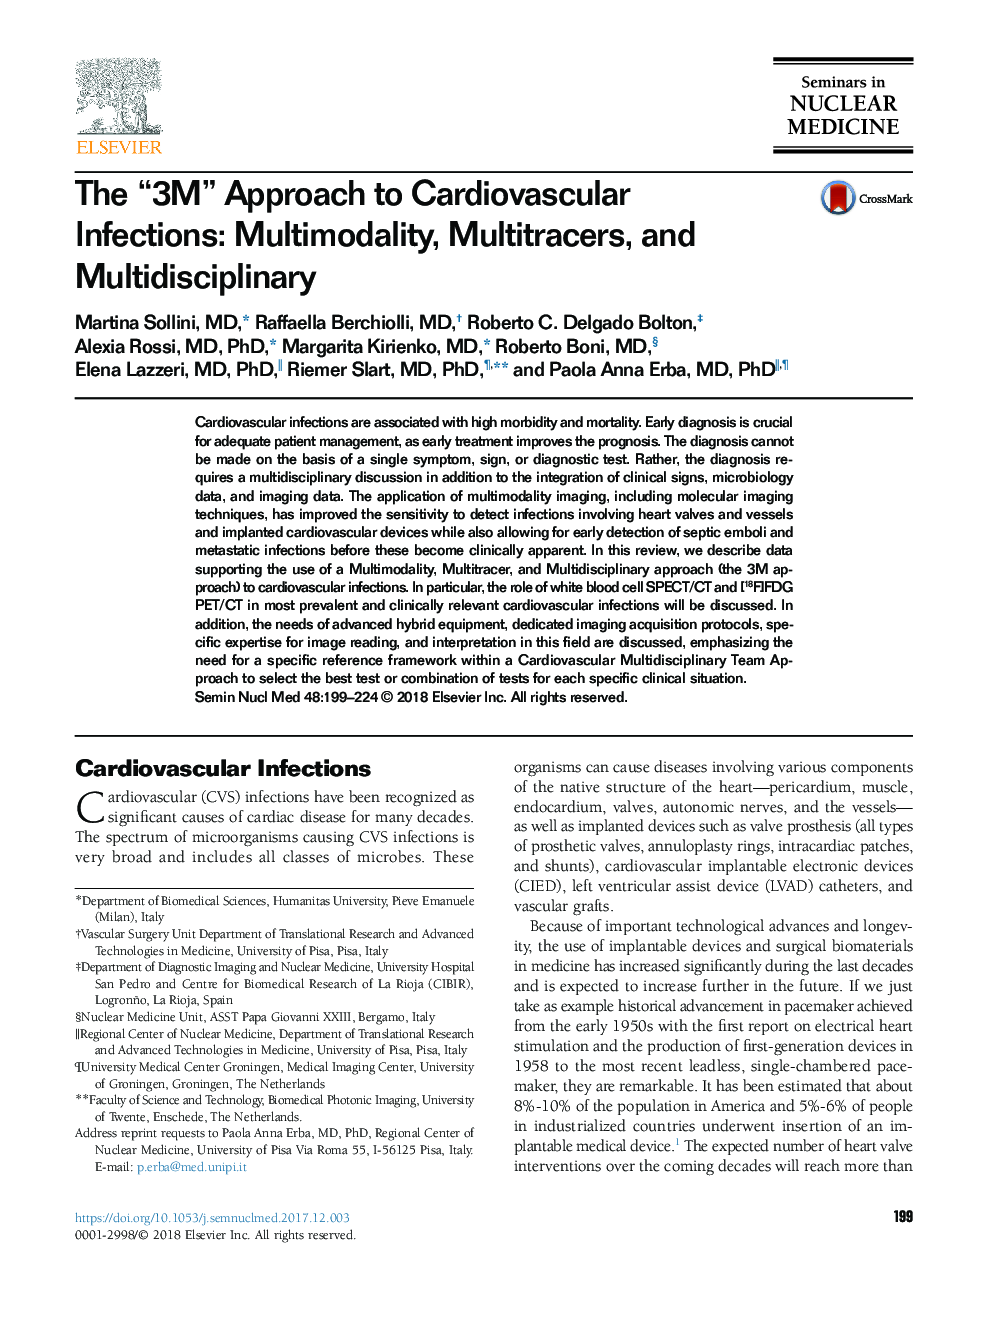 The “3M” Approach to Cardiovascular Infections: Multimodality, Multitracers, and Multidisciplinary